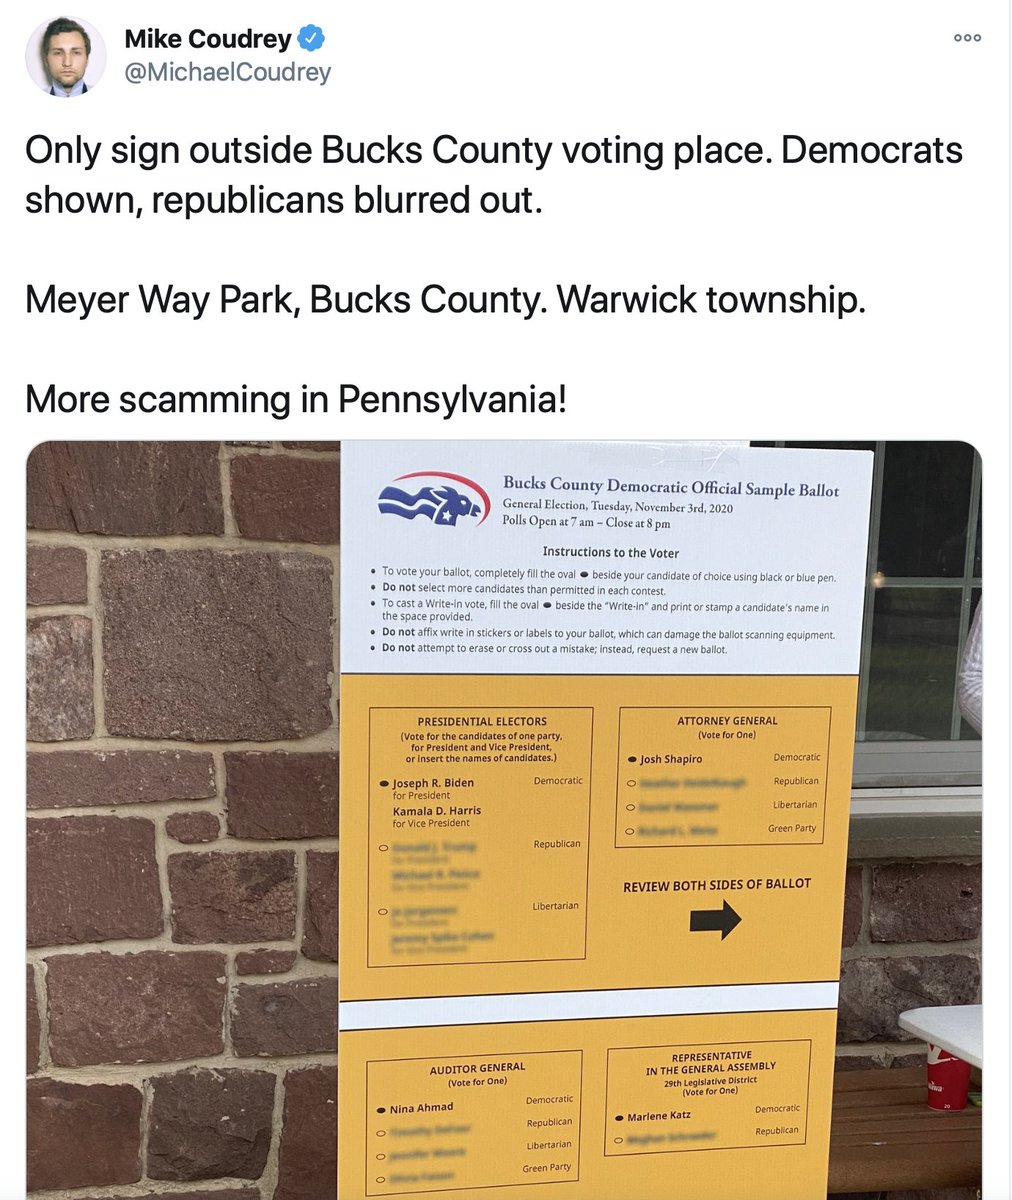 46/ This is a good one I called out yesterday, from my home county in Bucks. Unlikely many people claimed I don't actually think this is a photoshopped image (even though the names look comically blurred). Just look at the top: "Democratic official sample ballot."